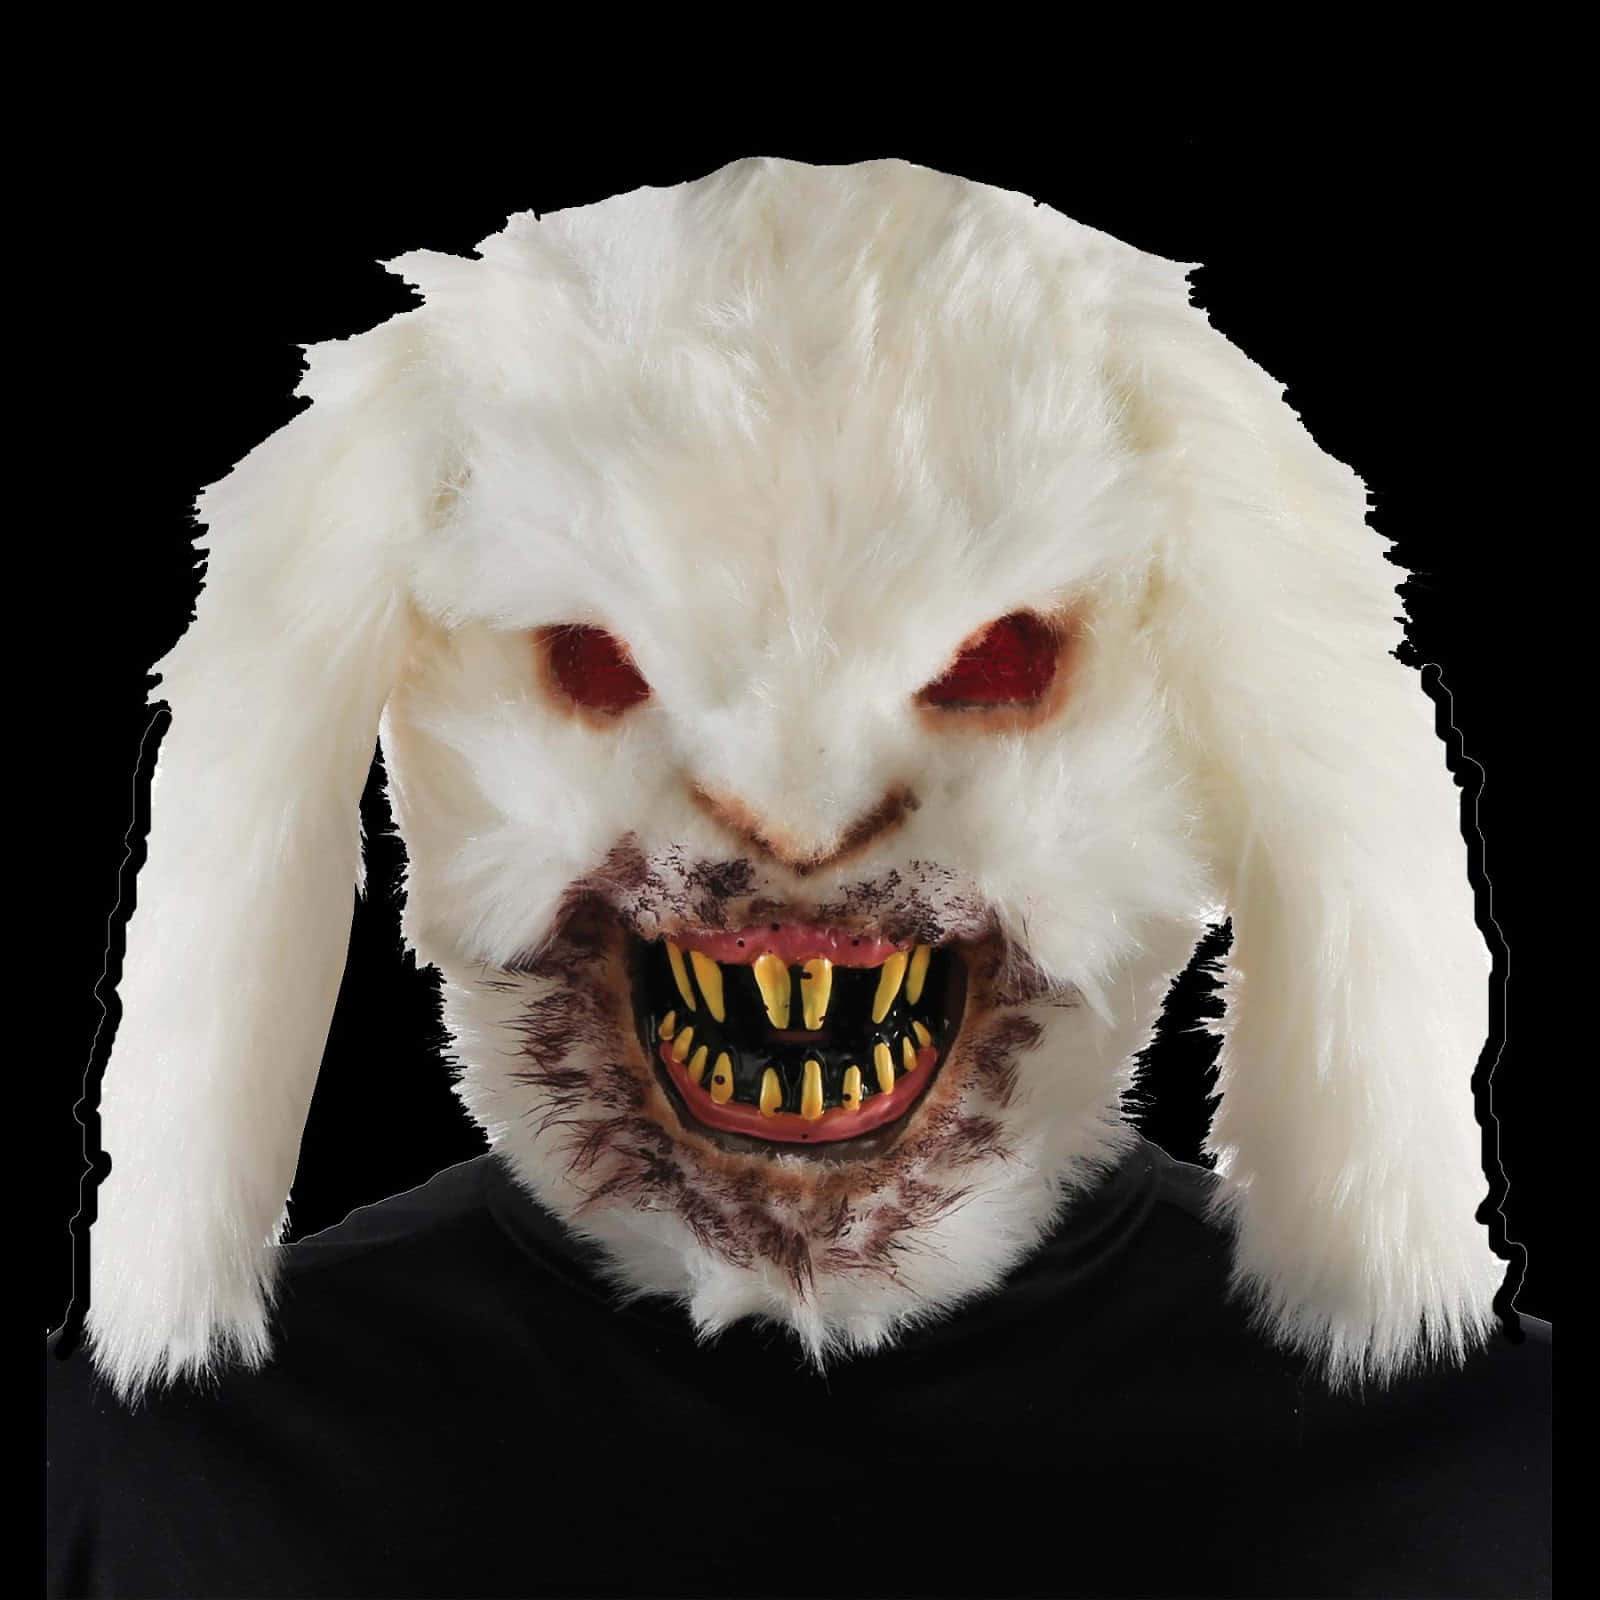 A creepy Easter bunny ready to surprise